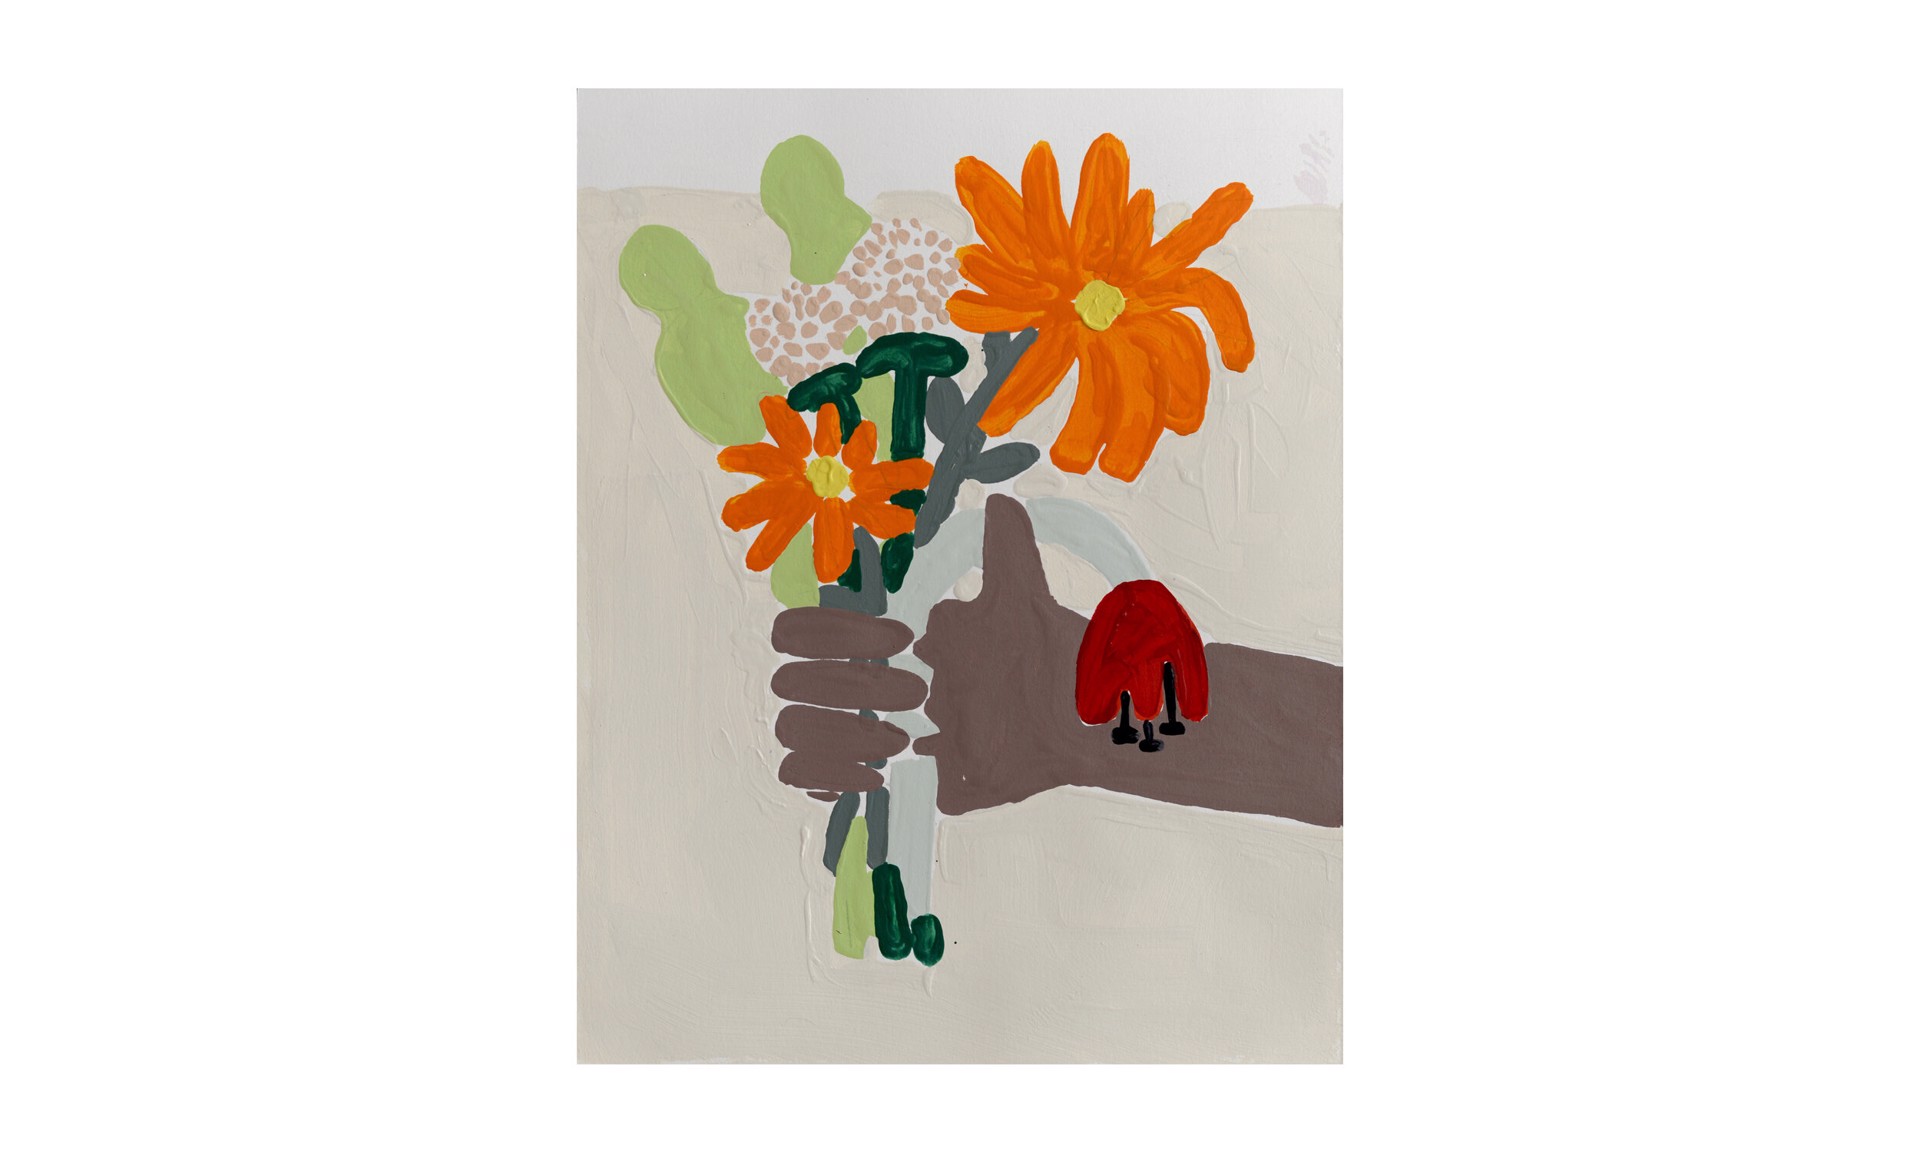 Hand Holding Flowers by CARISSA POTTER